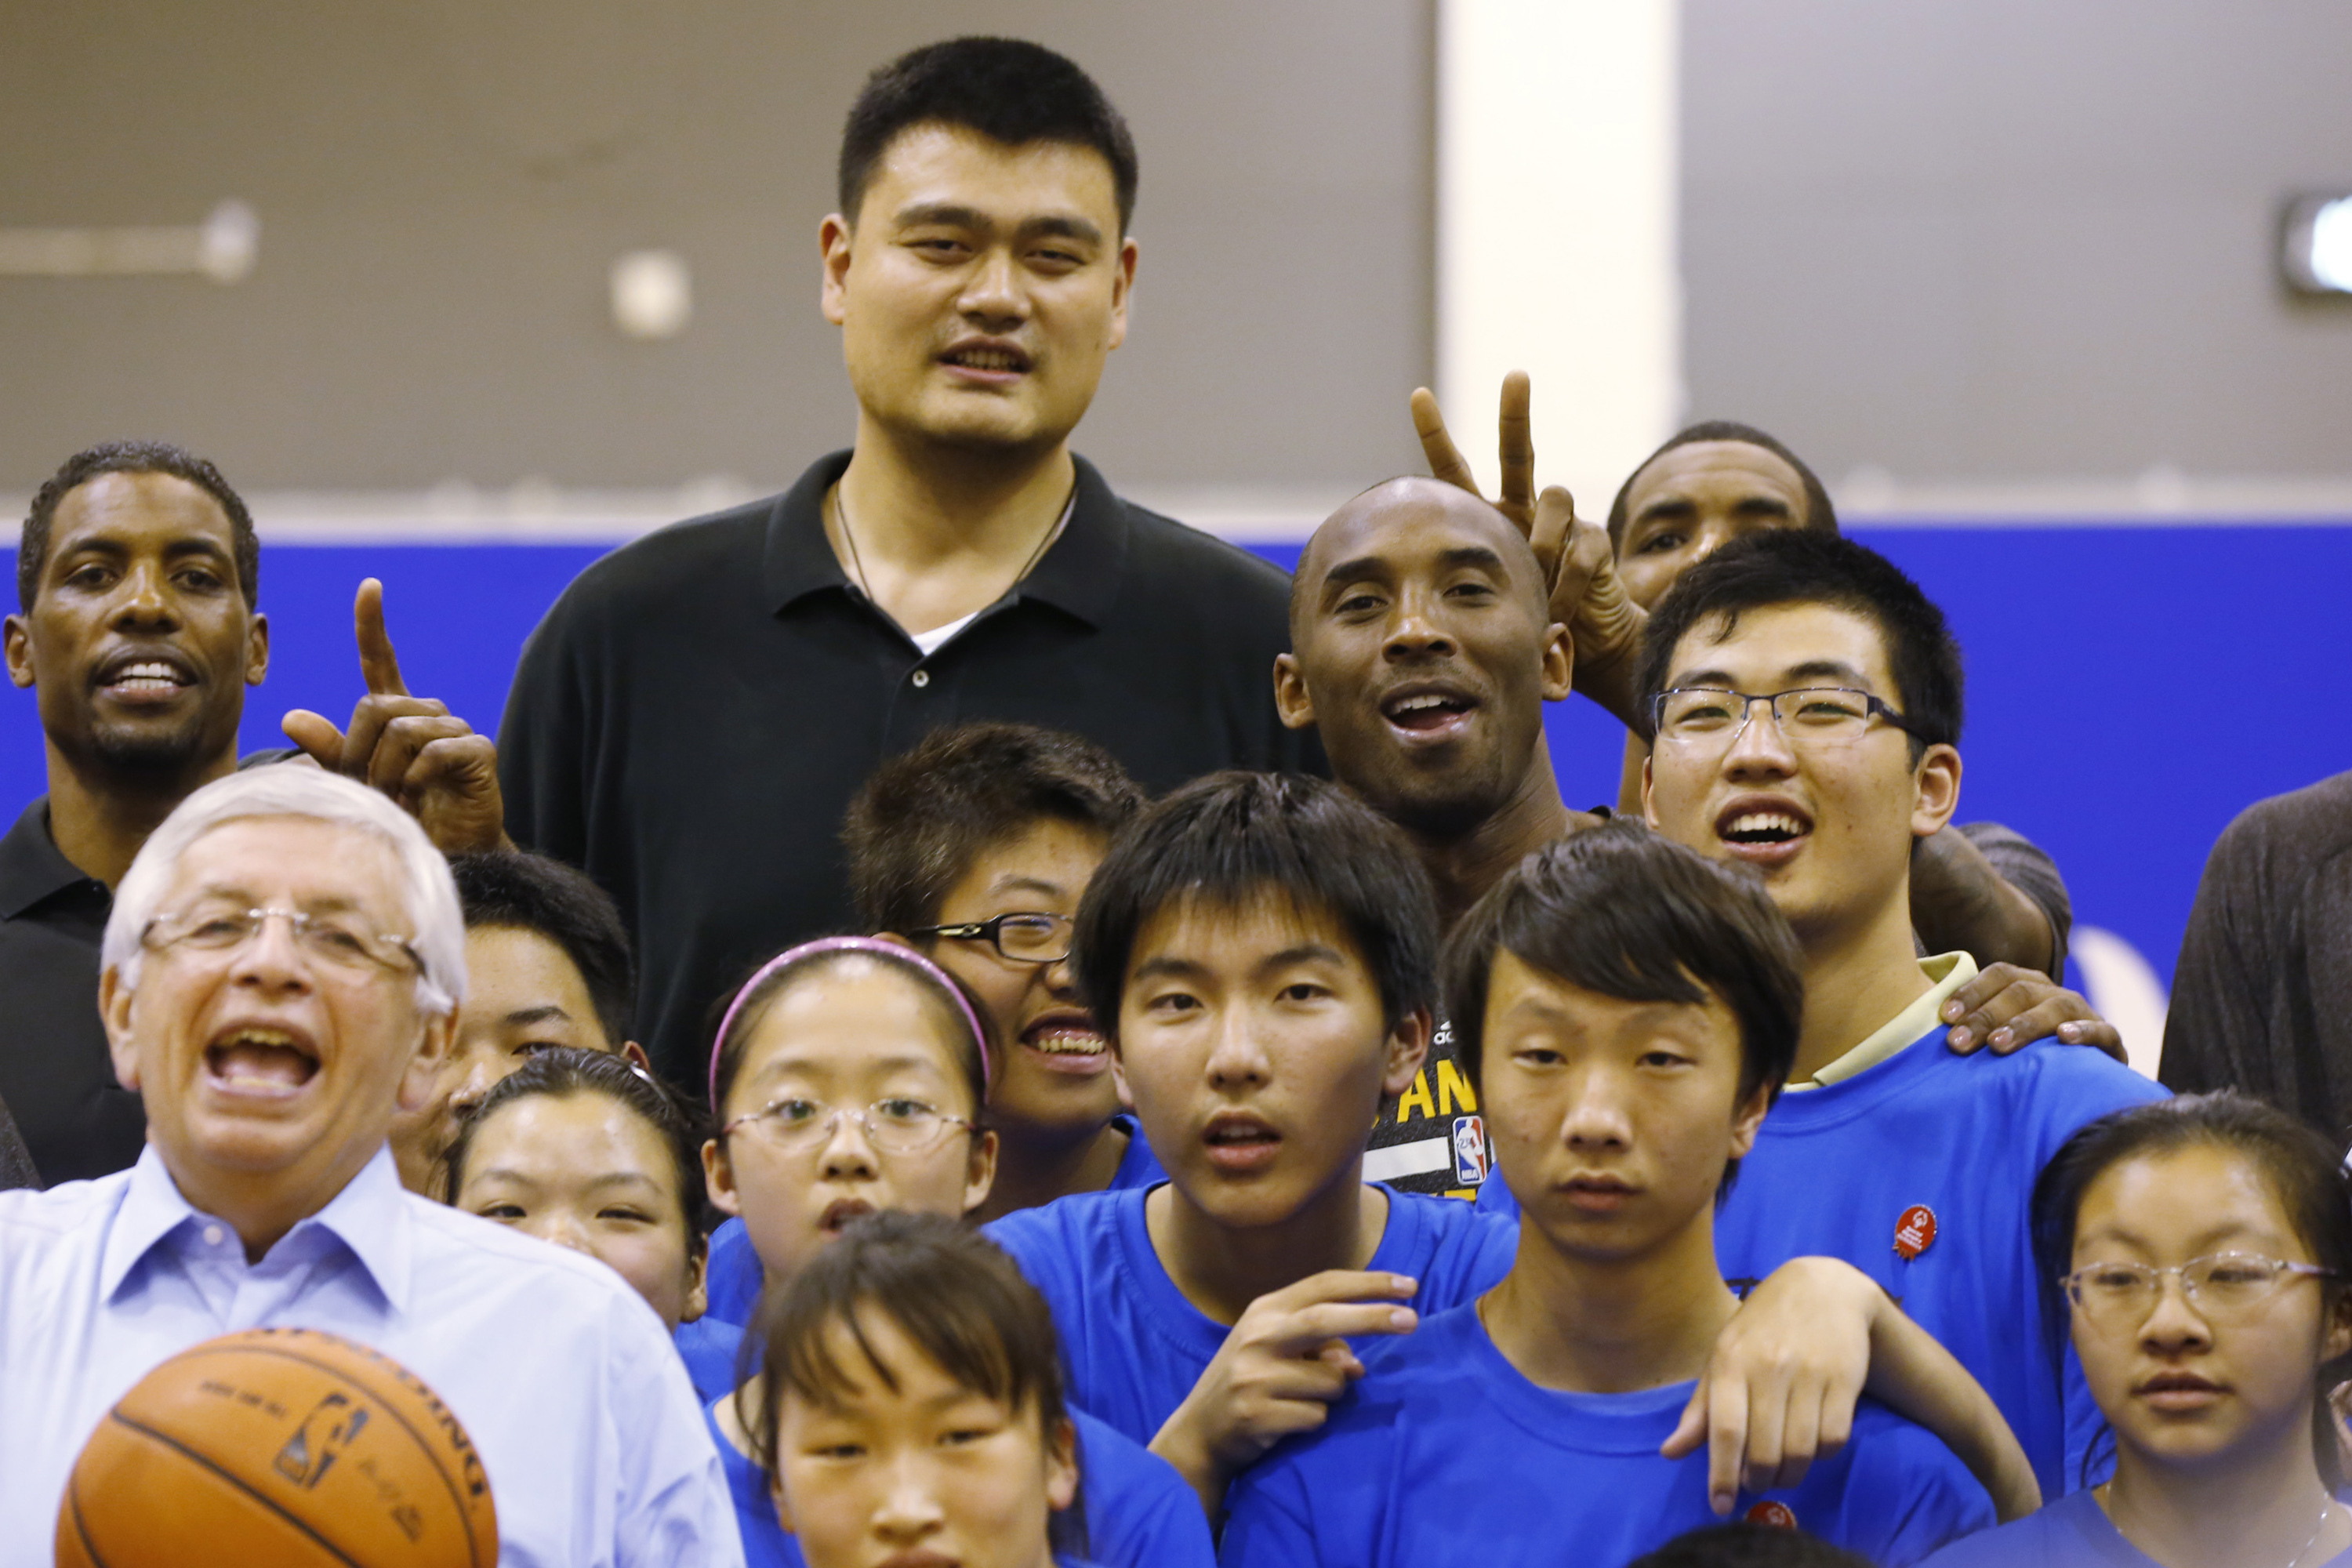 How Yao Ming broke into the NBA and created a lasting legacy - The Athletic